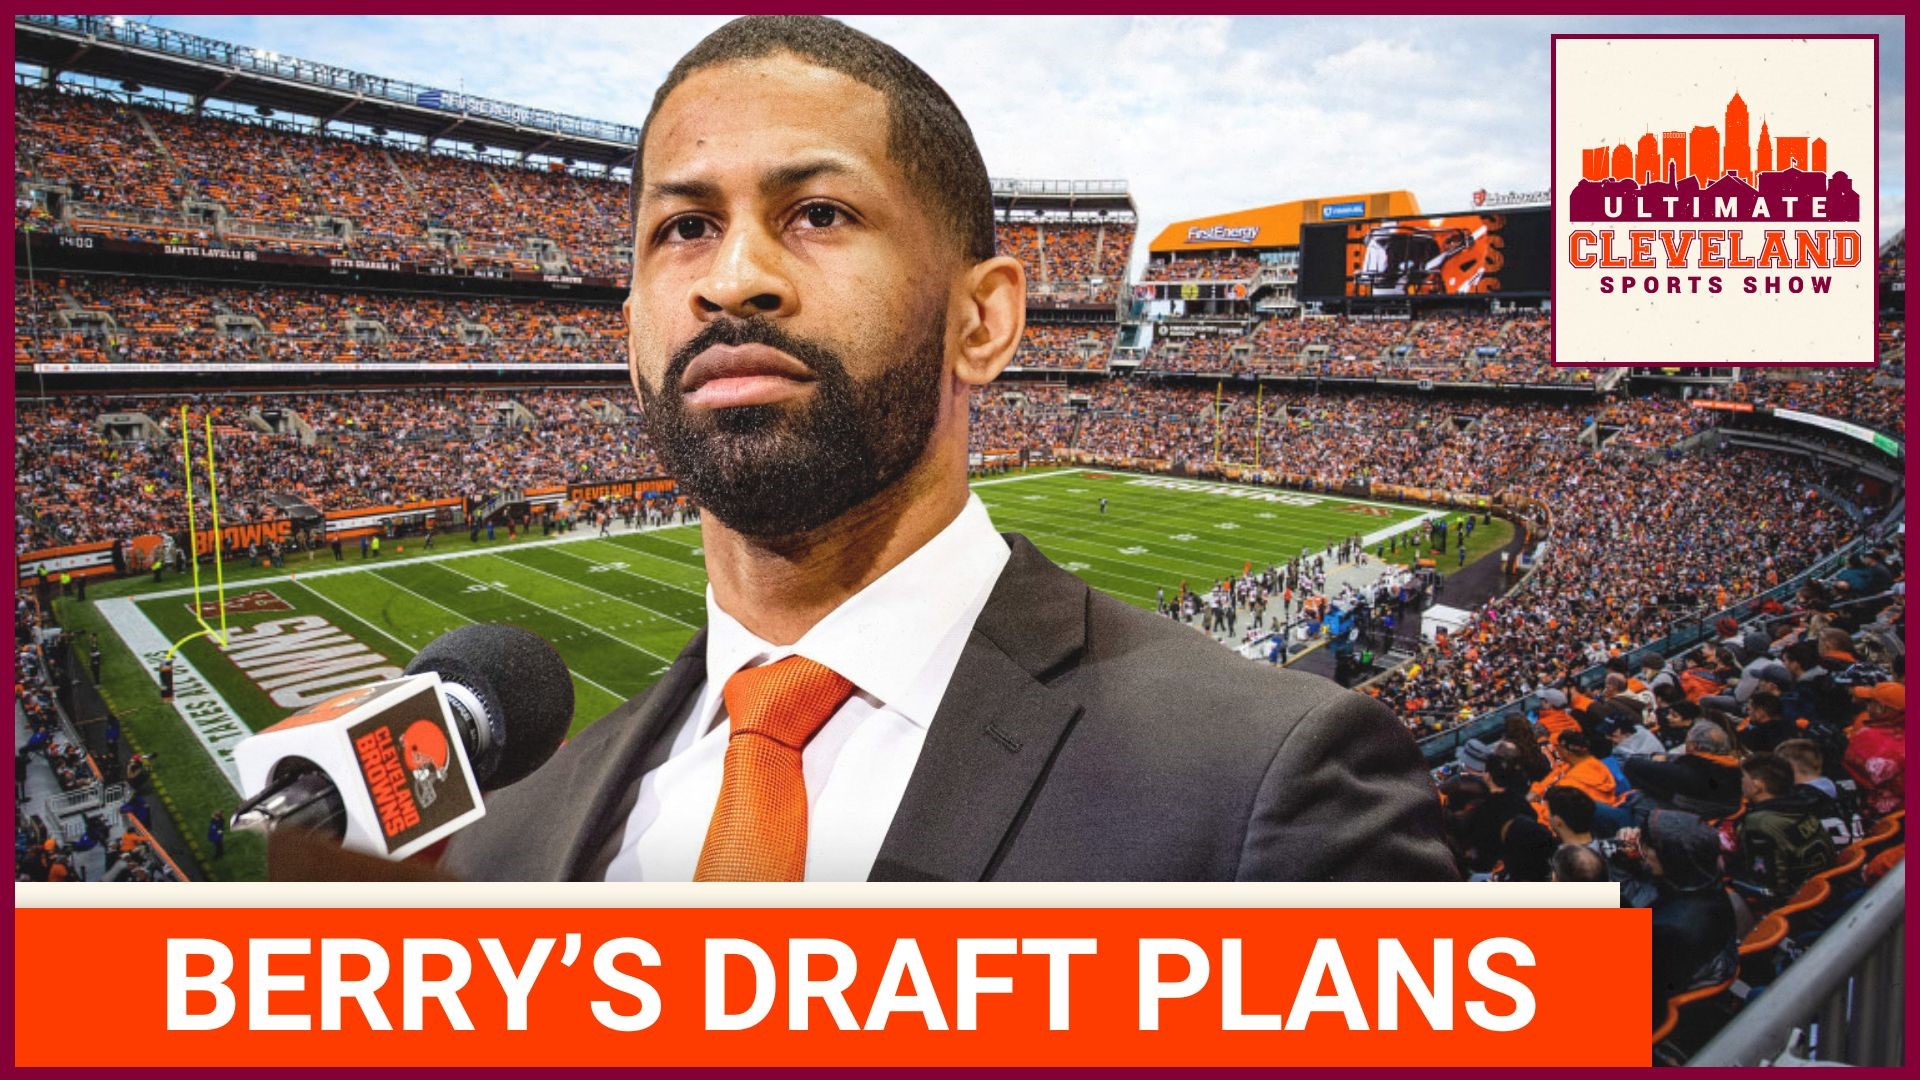 Andrew Berry addresses Draft plans. Are you clearer or more confused about the Browns' draft plans?